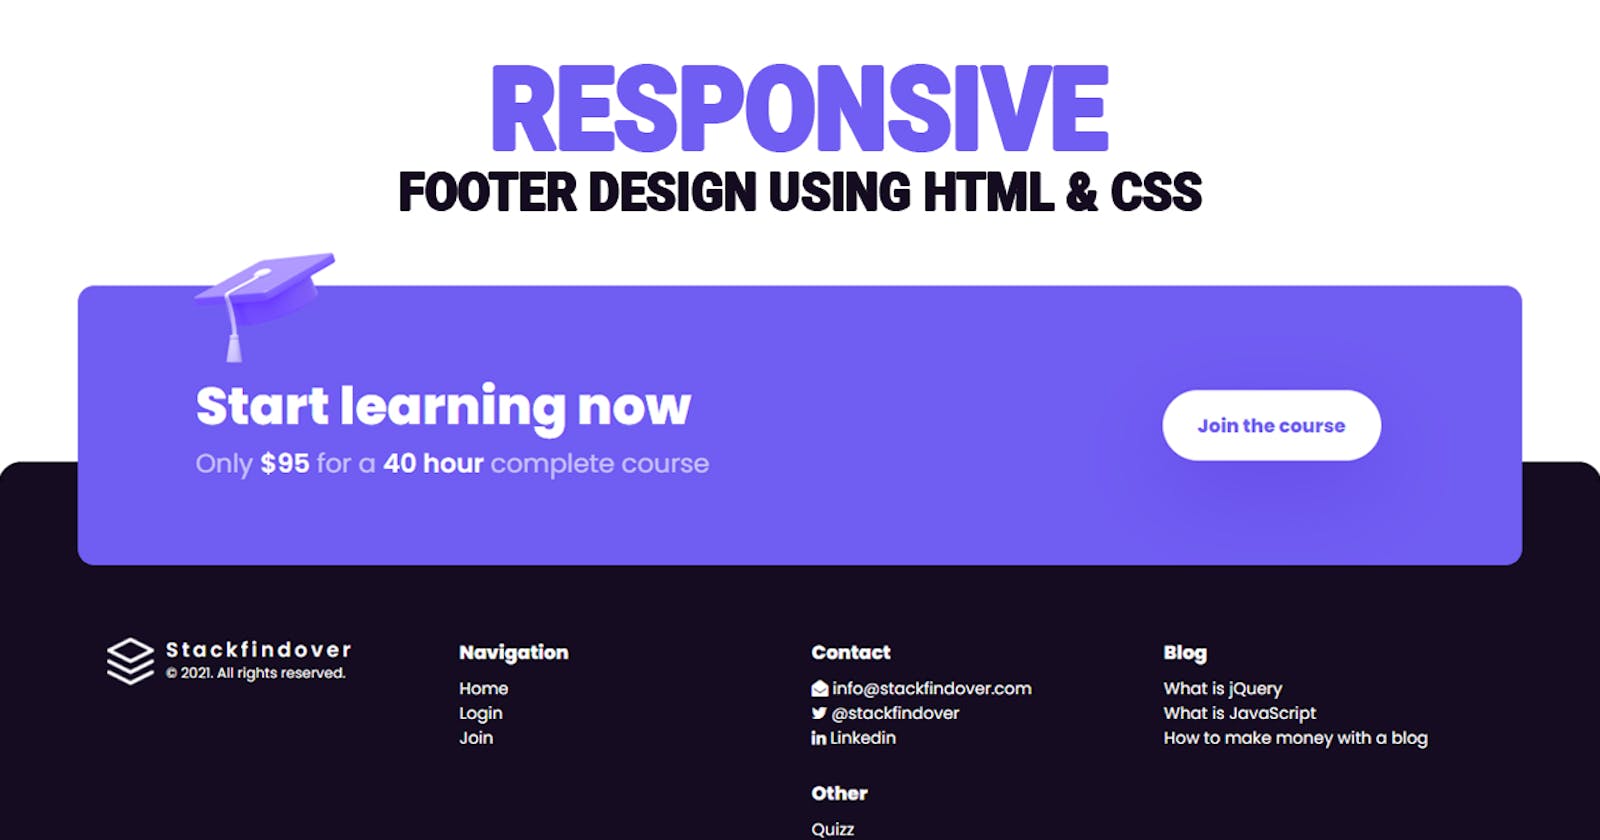 100% Responsive Website Footer | Awesome Footer Design 2021